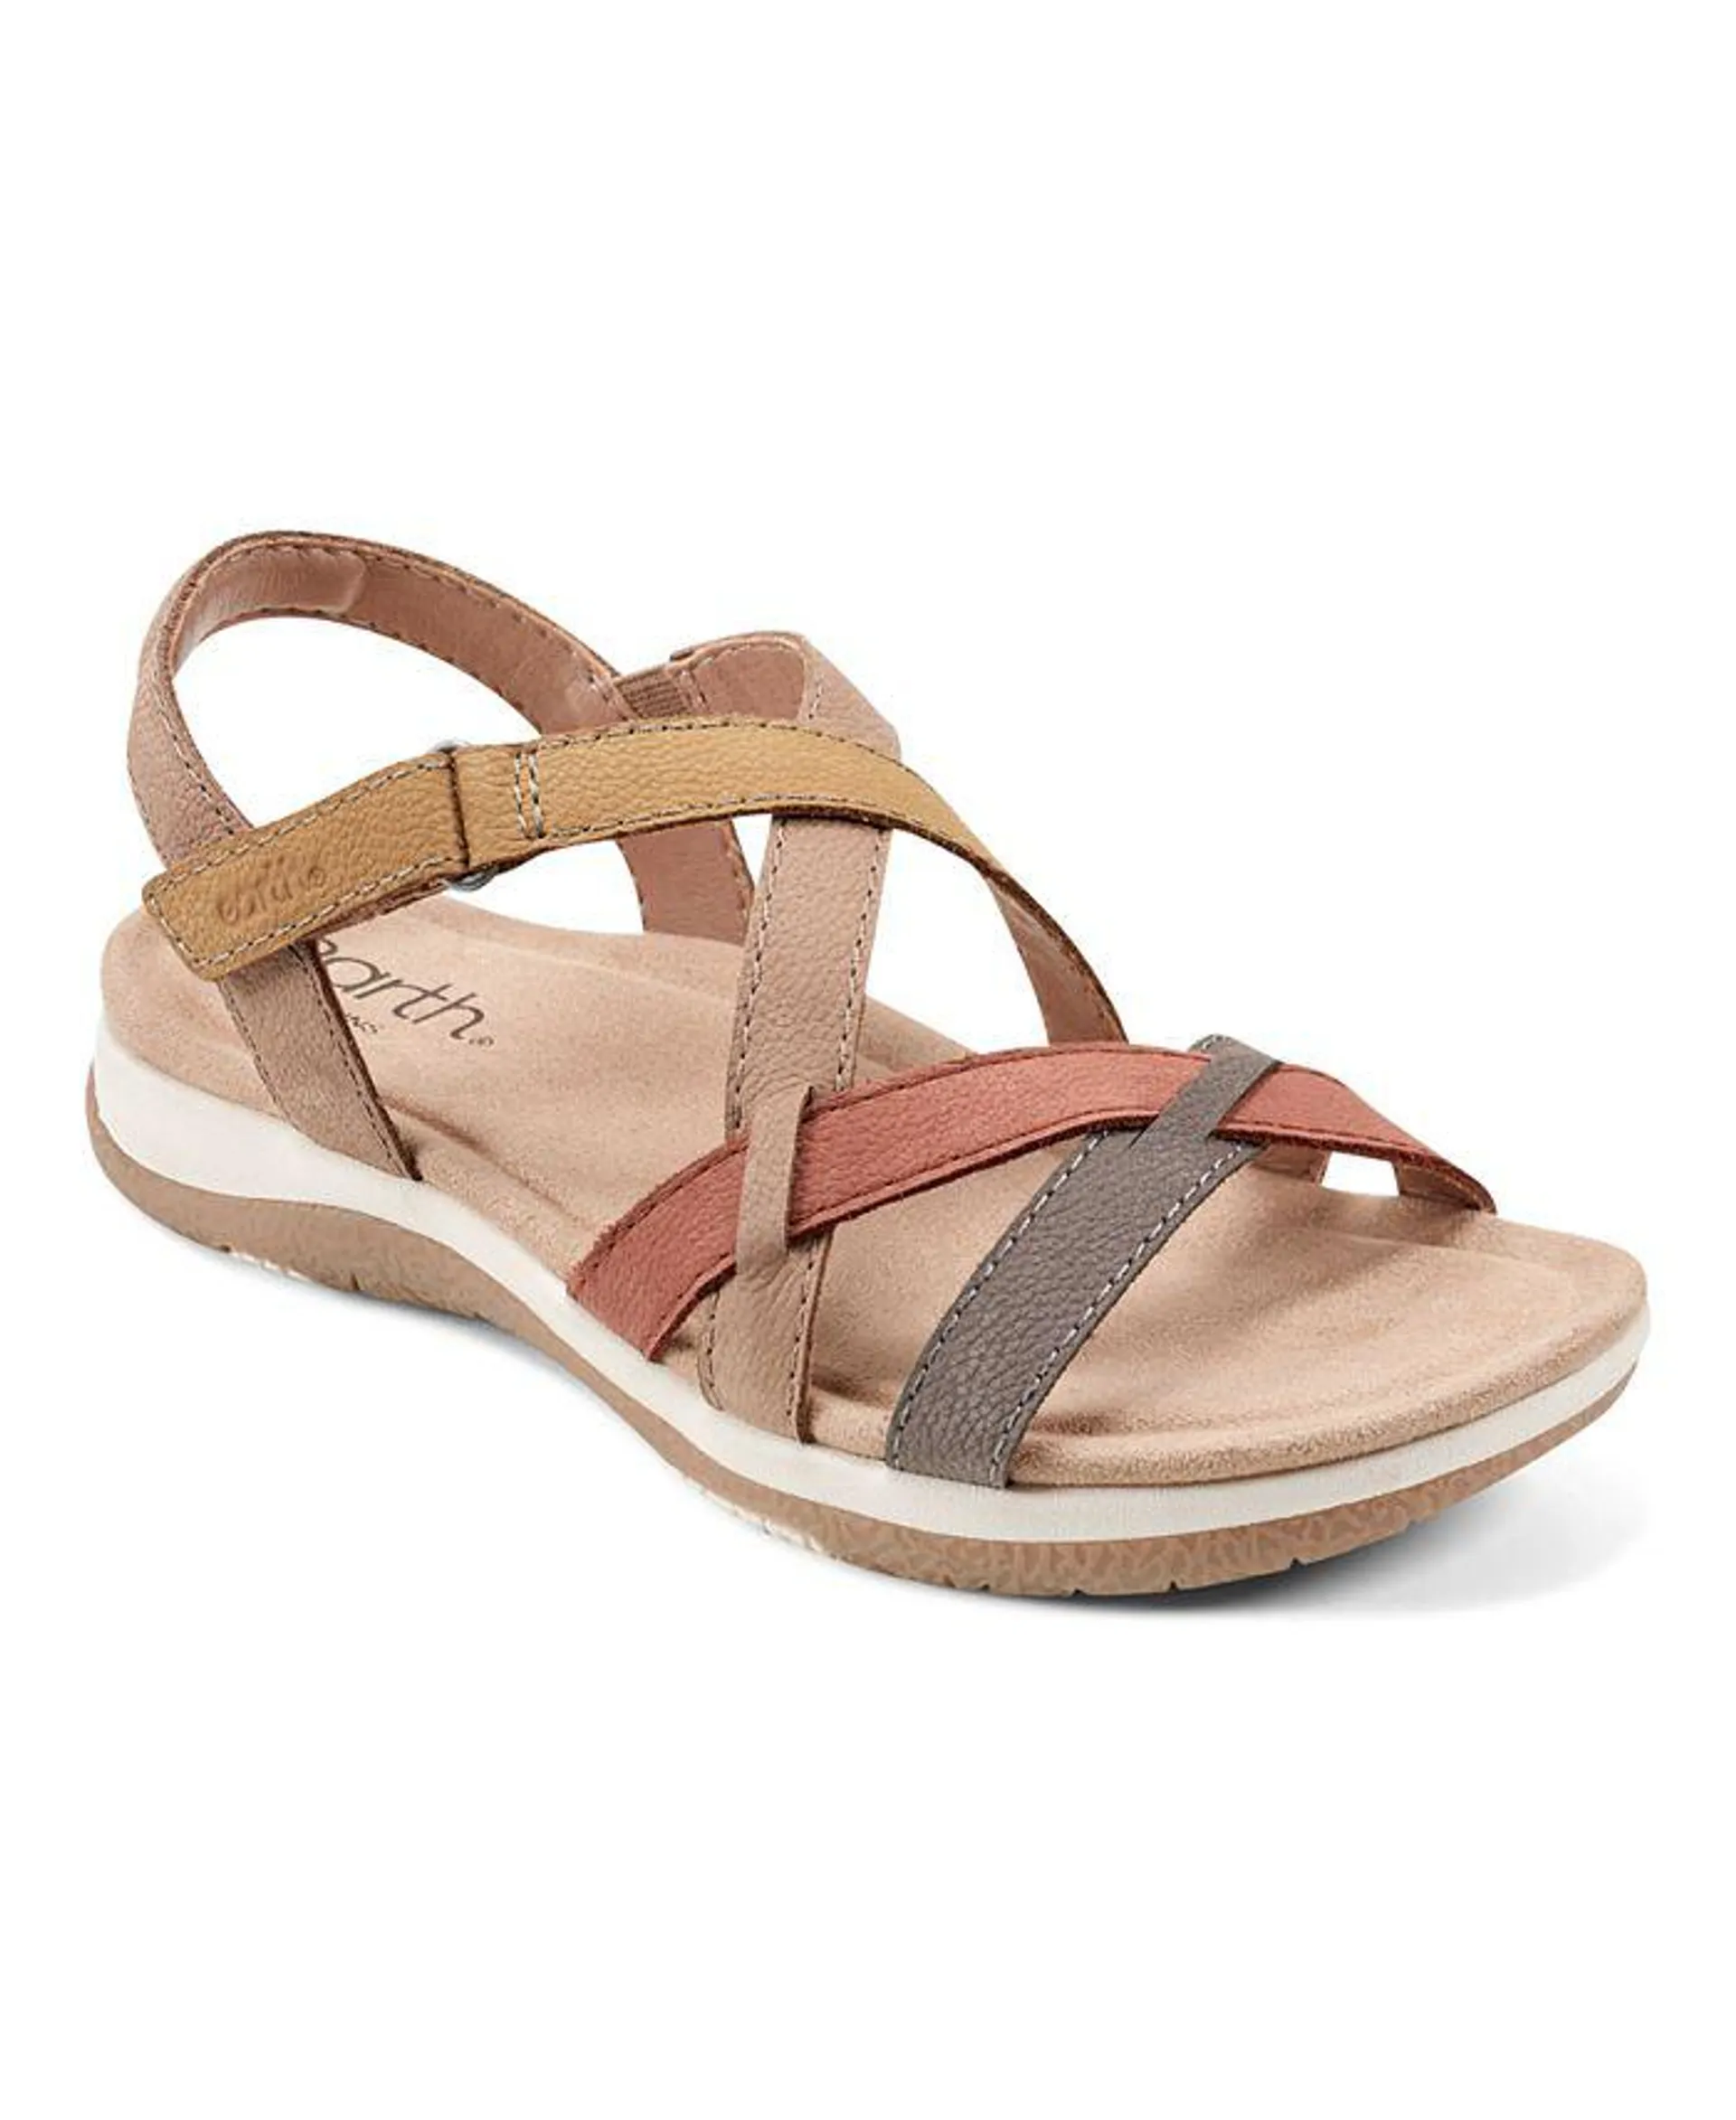 Women's Sterling Strappy Flat Casual Sport Sandals